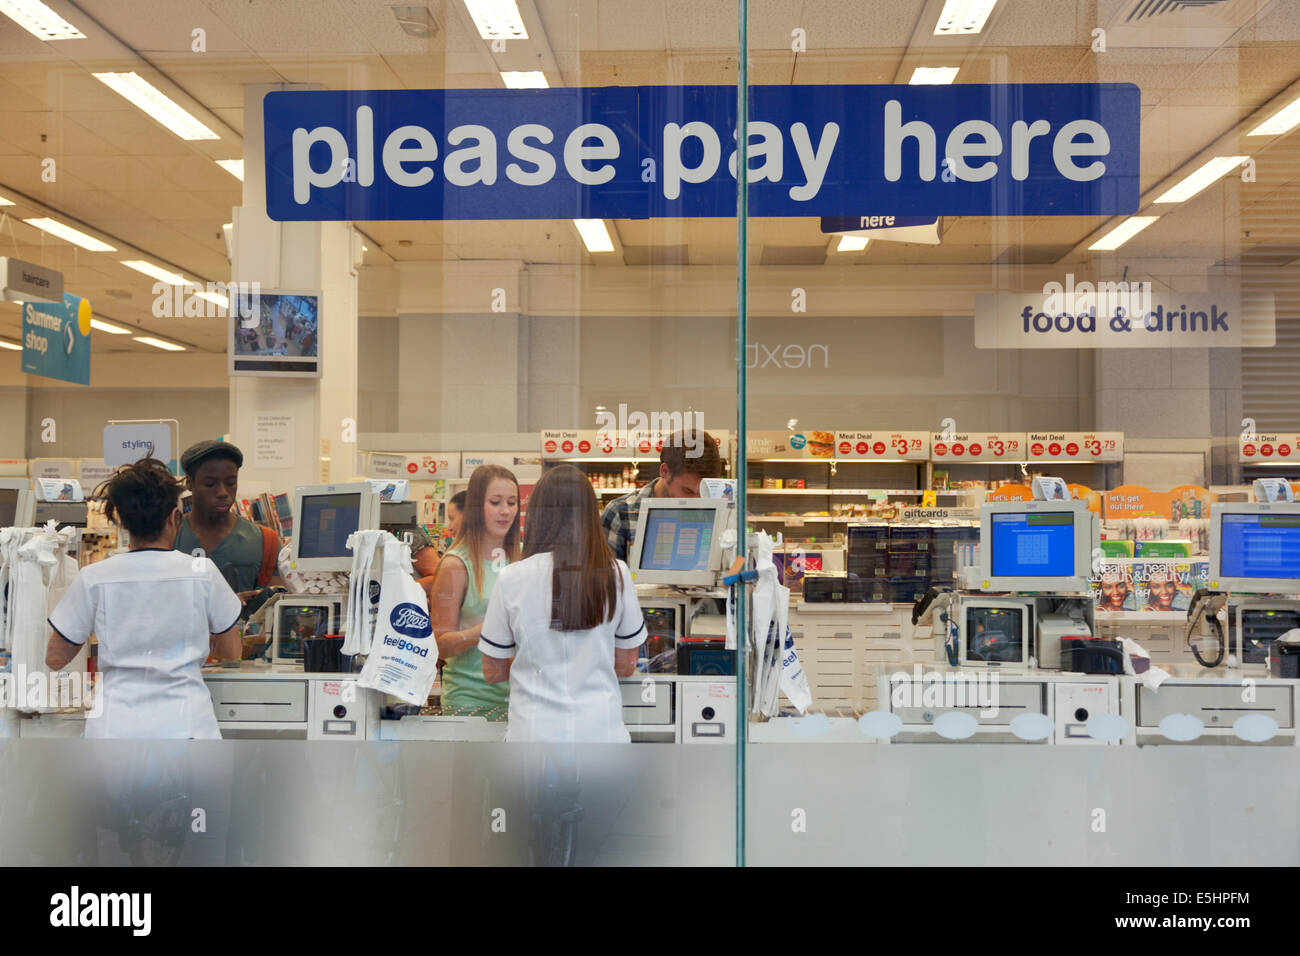 Please Pay here sign in a Supermarket Stock Photo